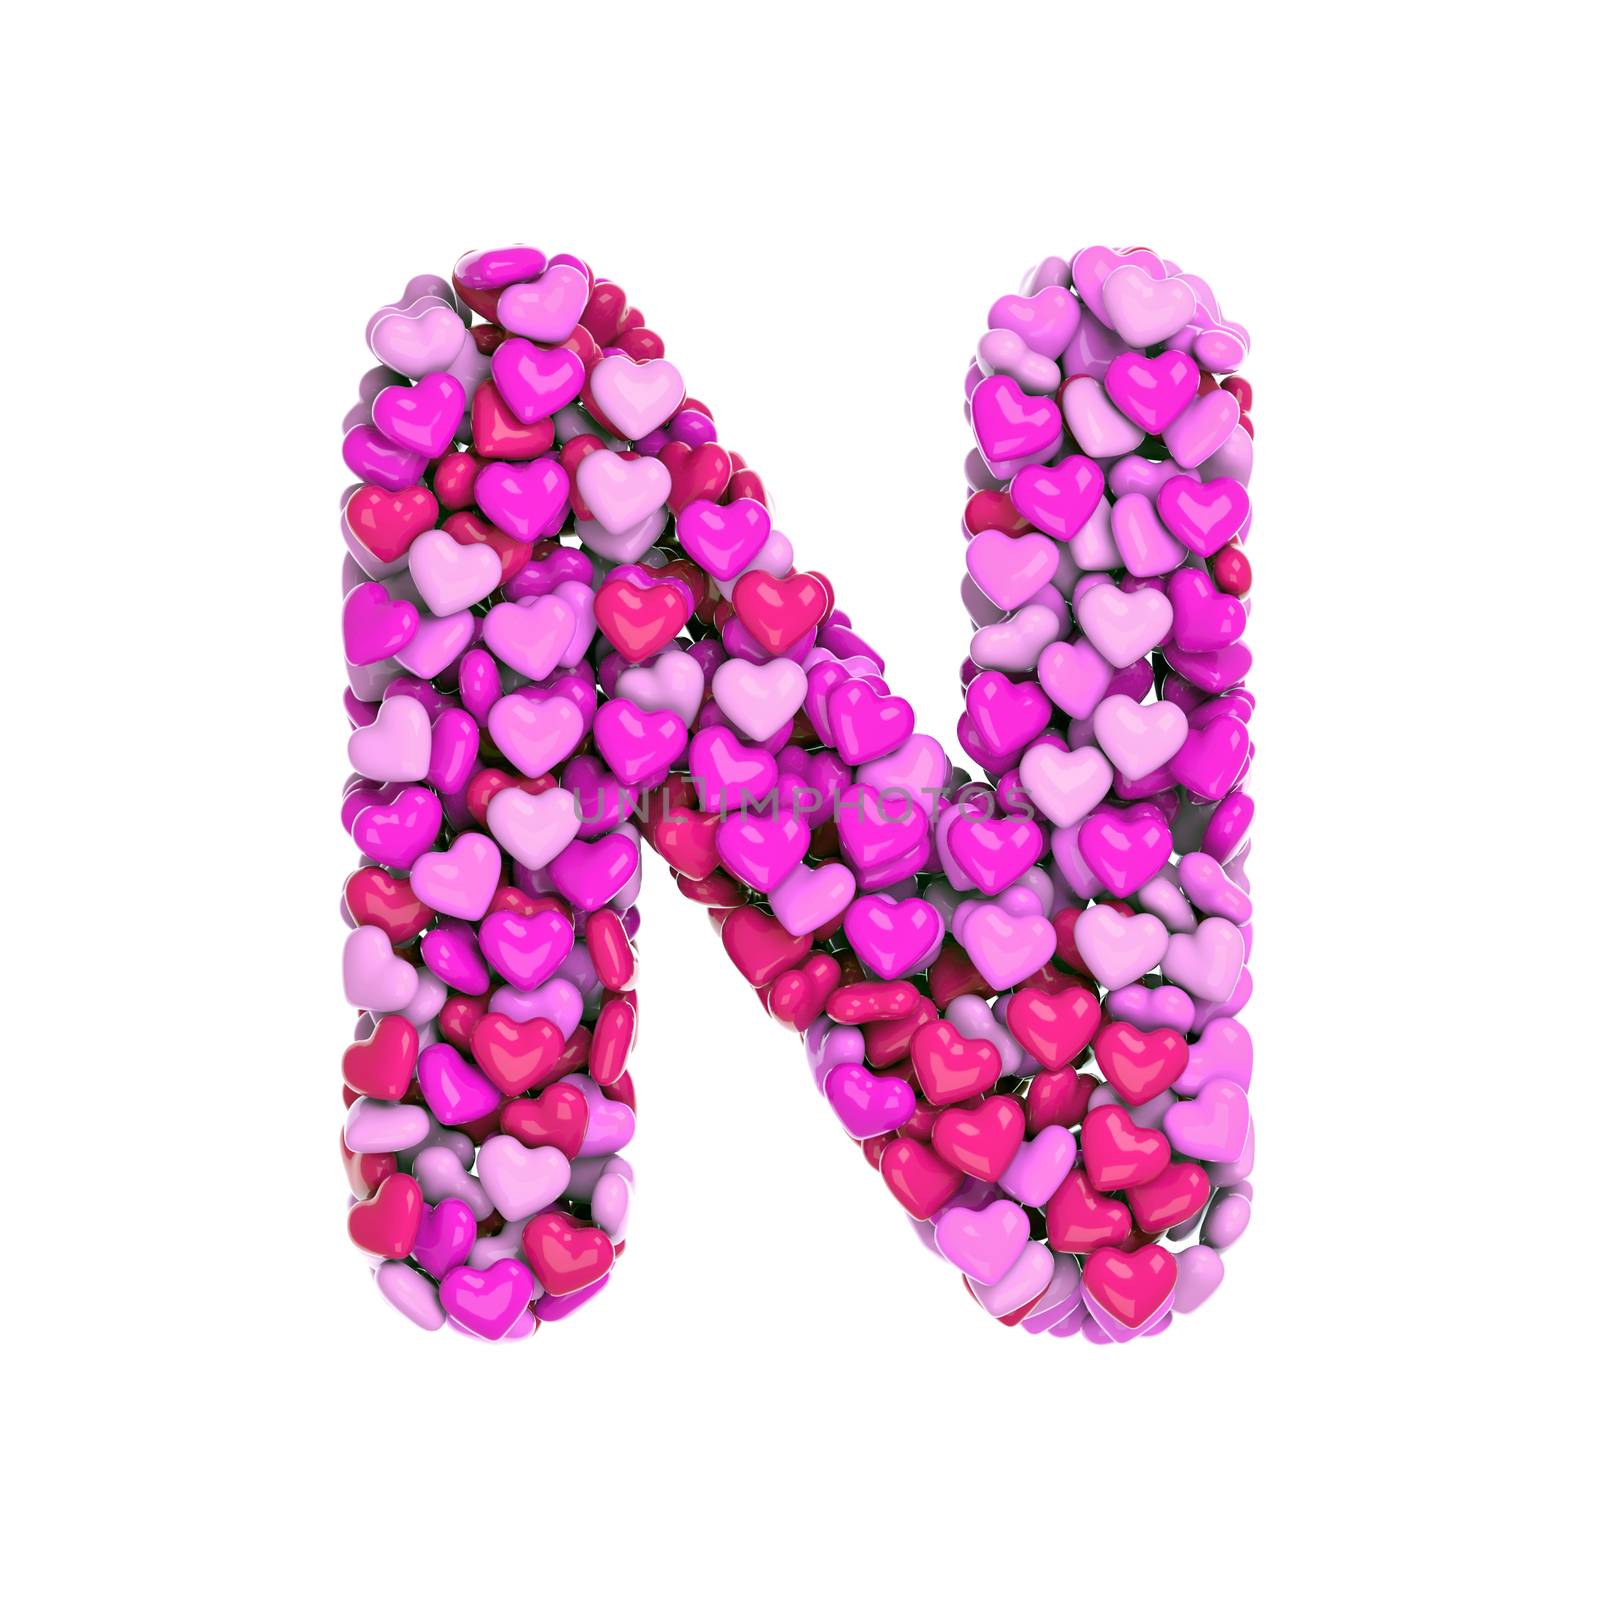 Valentine letter N - Uppercase 3d pink hearts font isolated on white background. This alphabet is perfect for creative illustrations related but not limited to Love, passion, wedding...